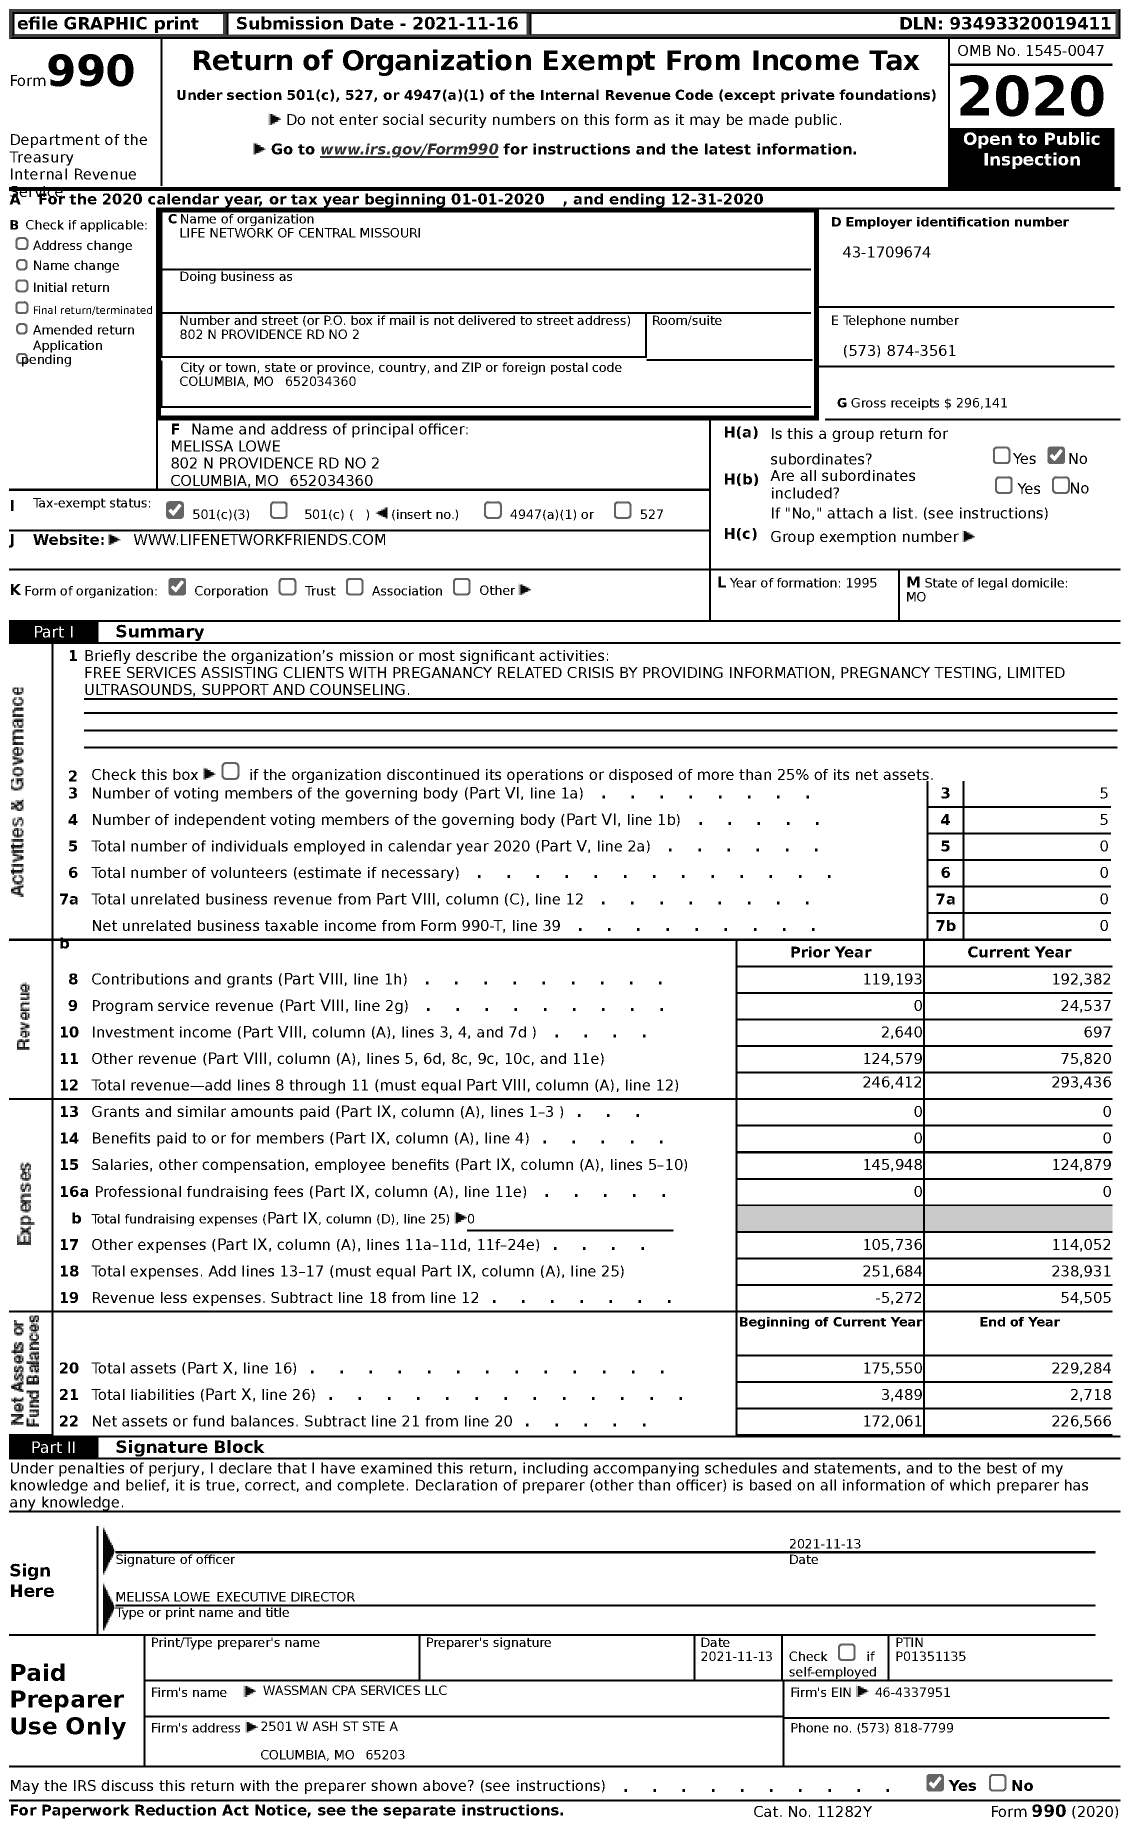 Image of first page of 2020 Form 990 for Life Network of Central Missouri